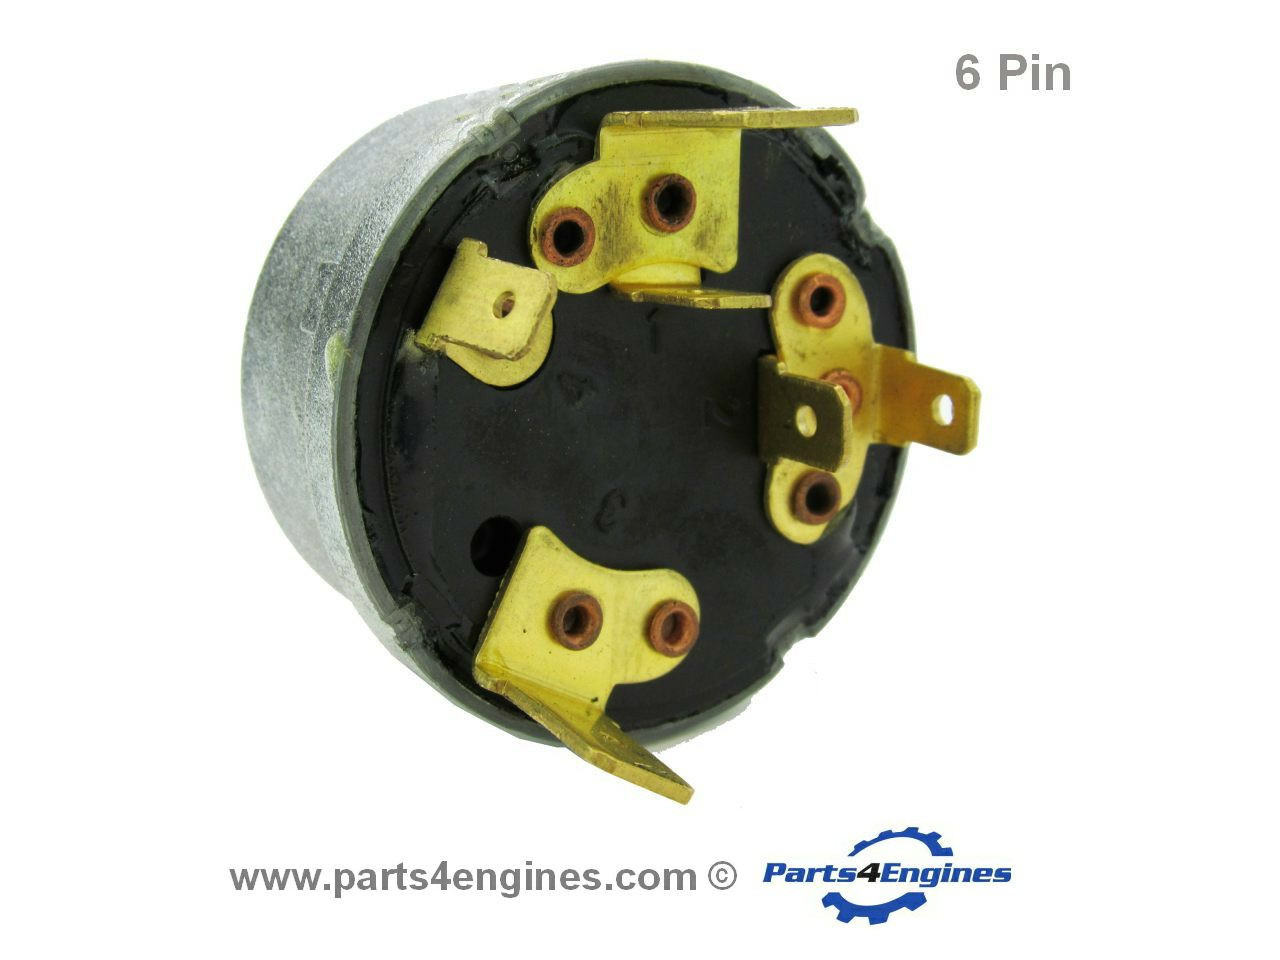 6pin switch - Perkins 4.107 ignition switch from parts4engines.com